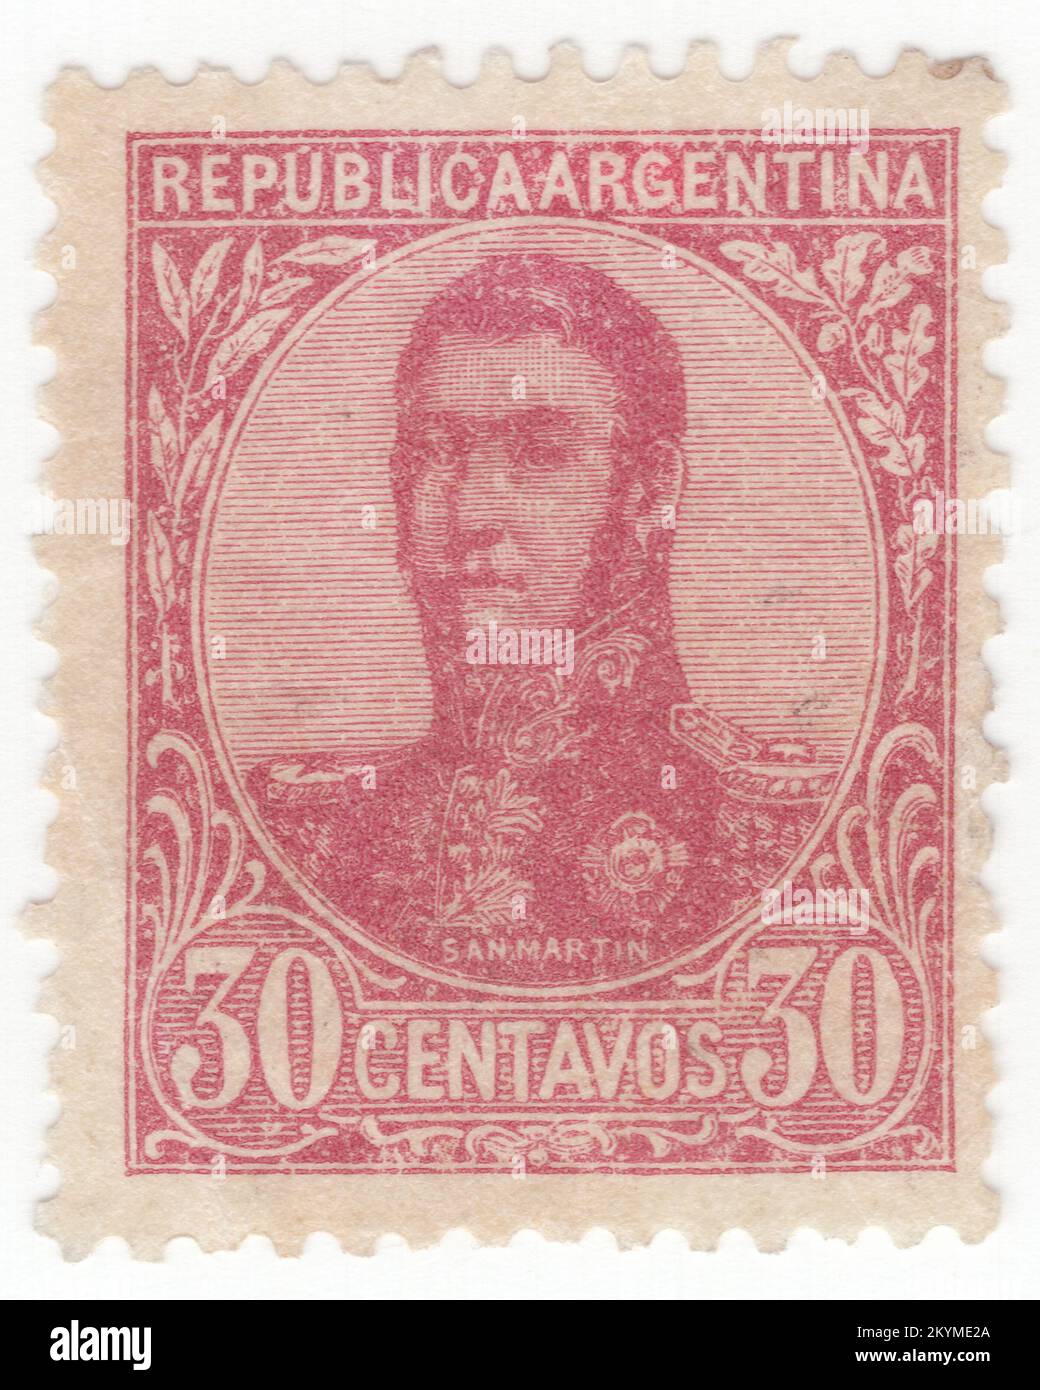 ARGENTINA - 1908: 30 centavos dull rose postage stamp depicting portrait of José de San Martín (Jose Francisco de San Martín y Matorras), known as the Liberator of Argentina, Chile and Peru. Argentine general and the primary leader of the southern and central parts of South America's successful struggle for independence from the Spanish Empire who served as the Protector of Peru. Born in Yapeyú, Corrientes, in modern-day Argentina, he left the Viceroyalty of the Río de la Plata at the early age of seven to study in Málaga, Spain Stock Photo